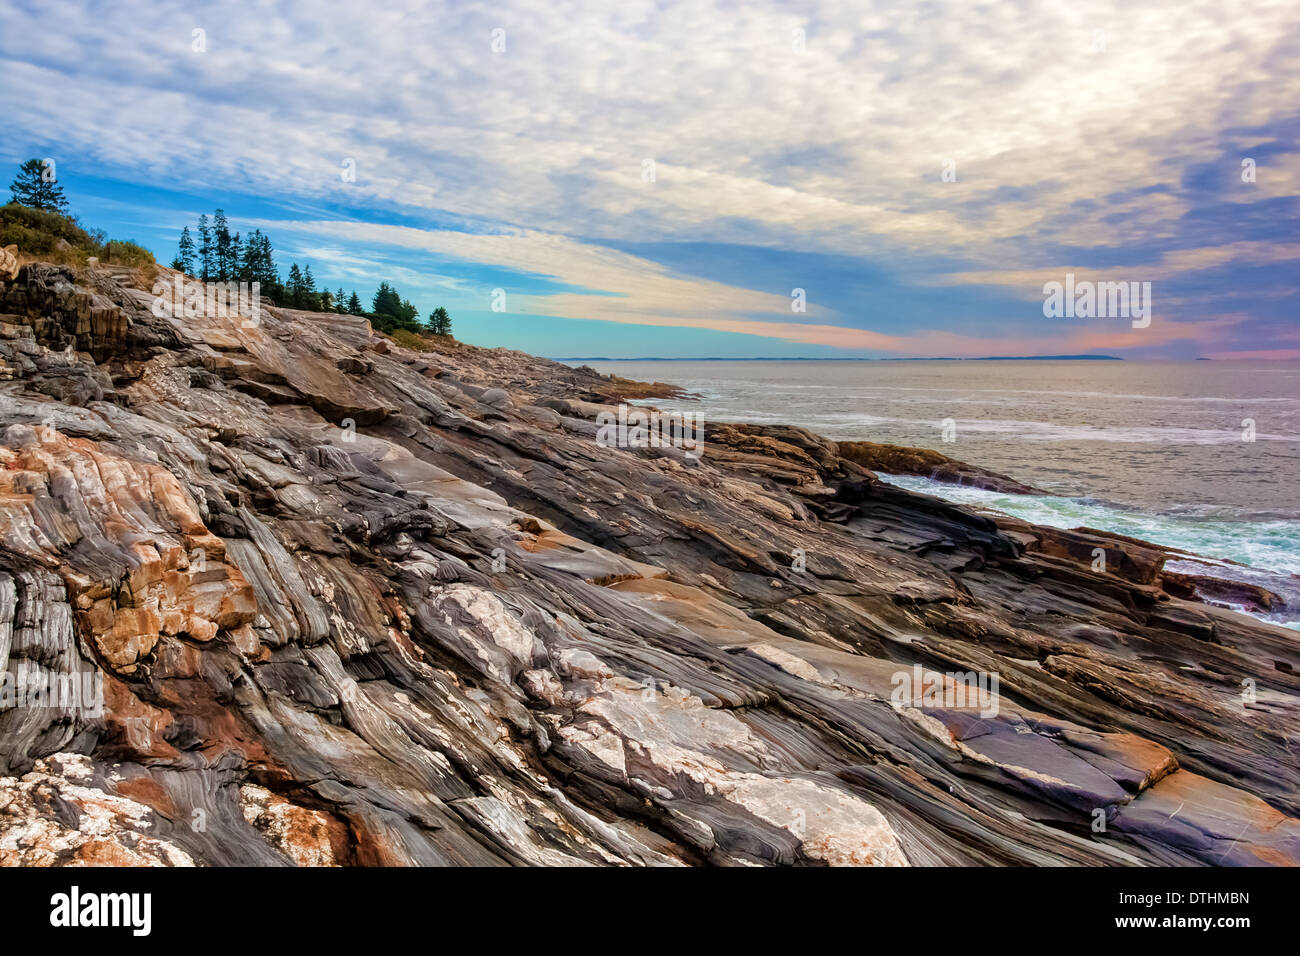 View of the vast rock ledges at Pemaquid Point, Maine with the ocean in the background and distant trees. Stock Photo